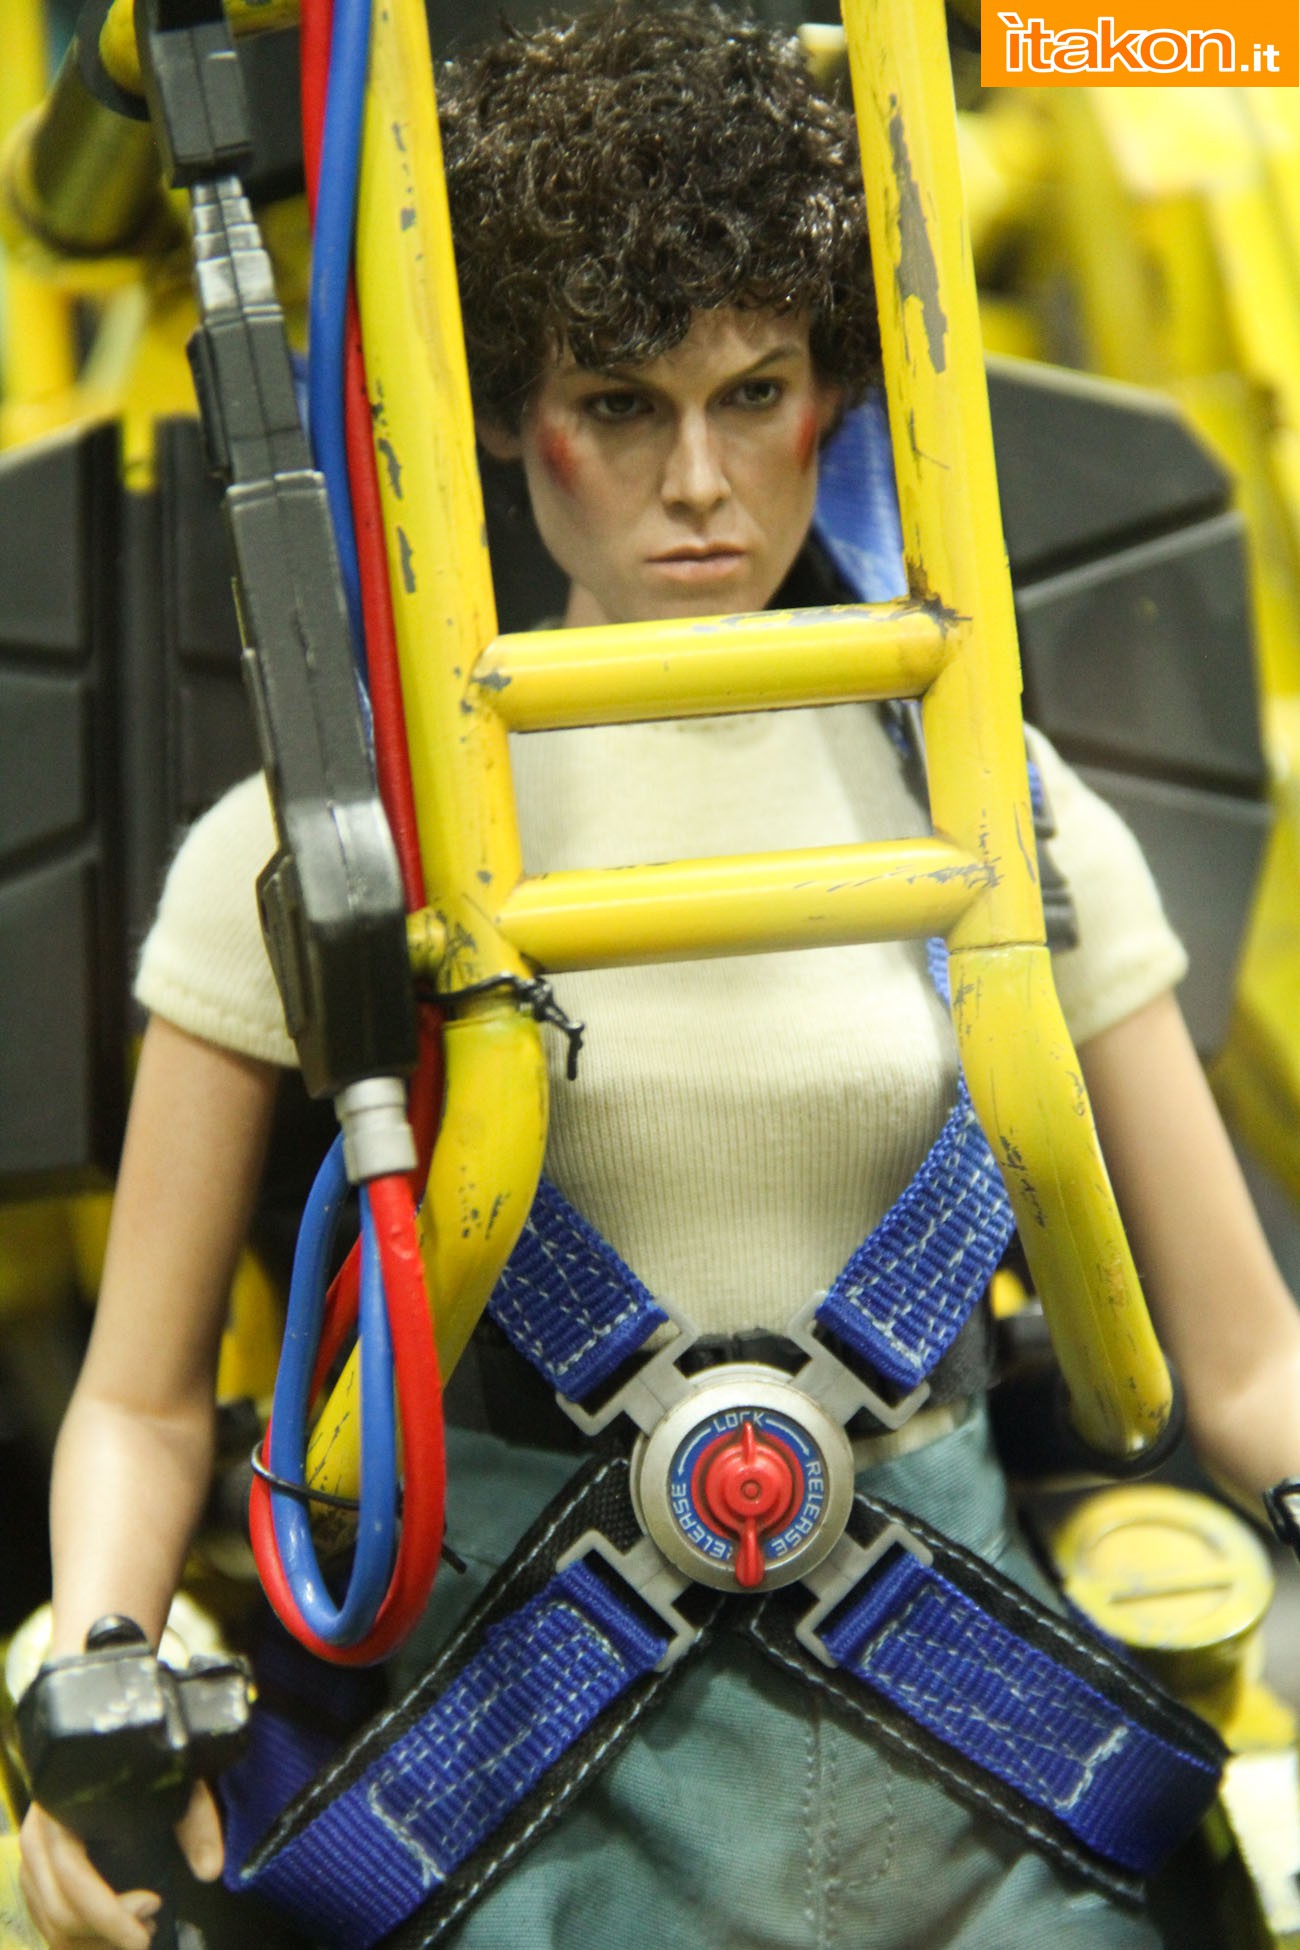 sdcc2014-hot-toys-booth-48.jpg